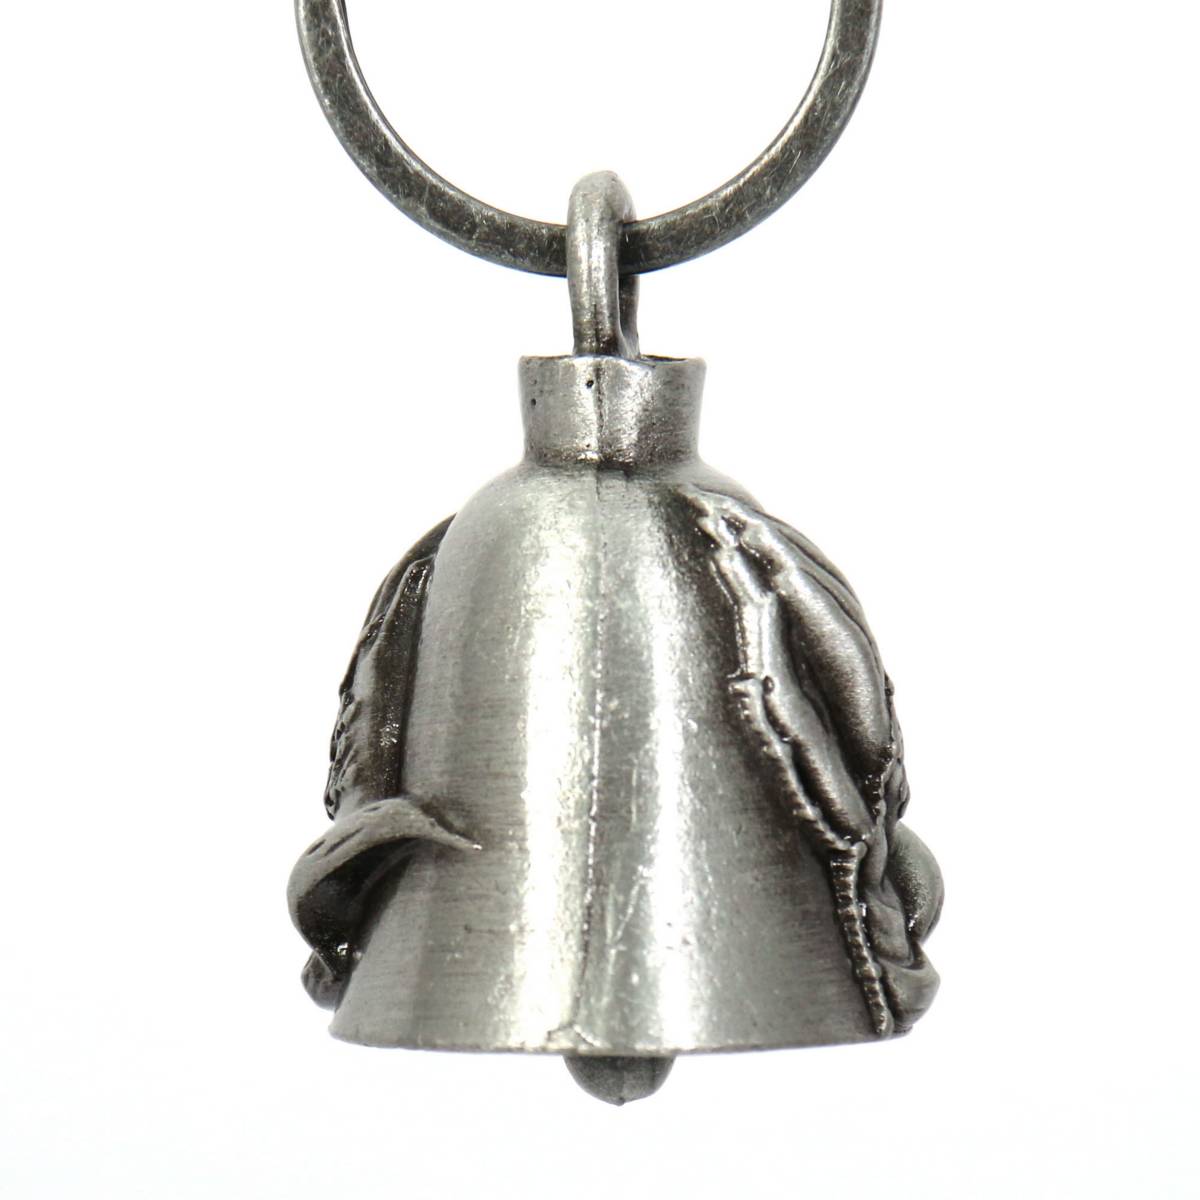 Milwaukee Leather MLB9035 'Praying Hands' Motorcycle Good Luck Bell | Key Chain Accessory for Bikers